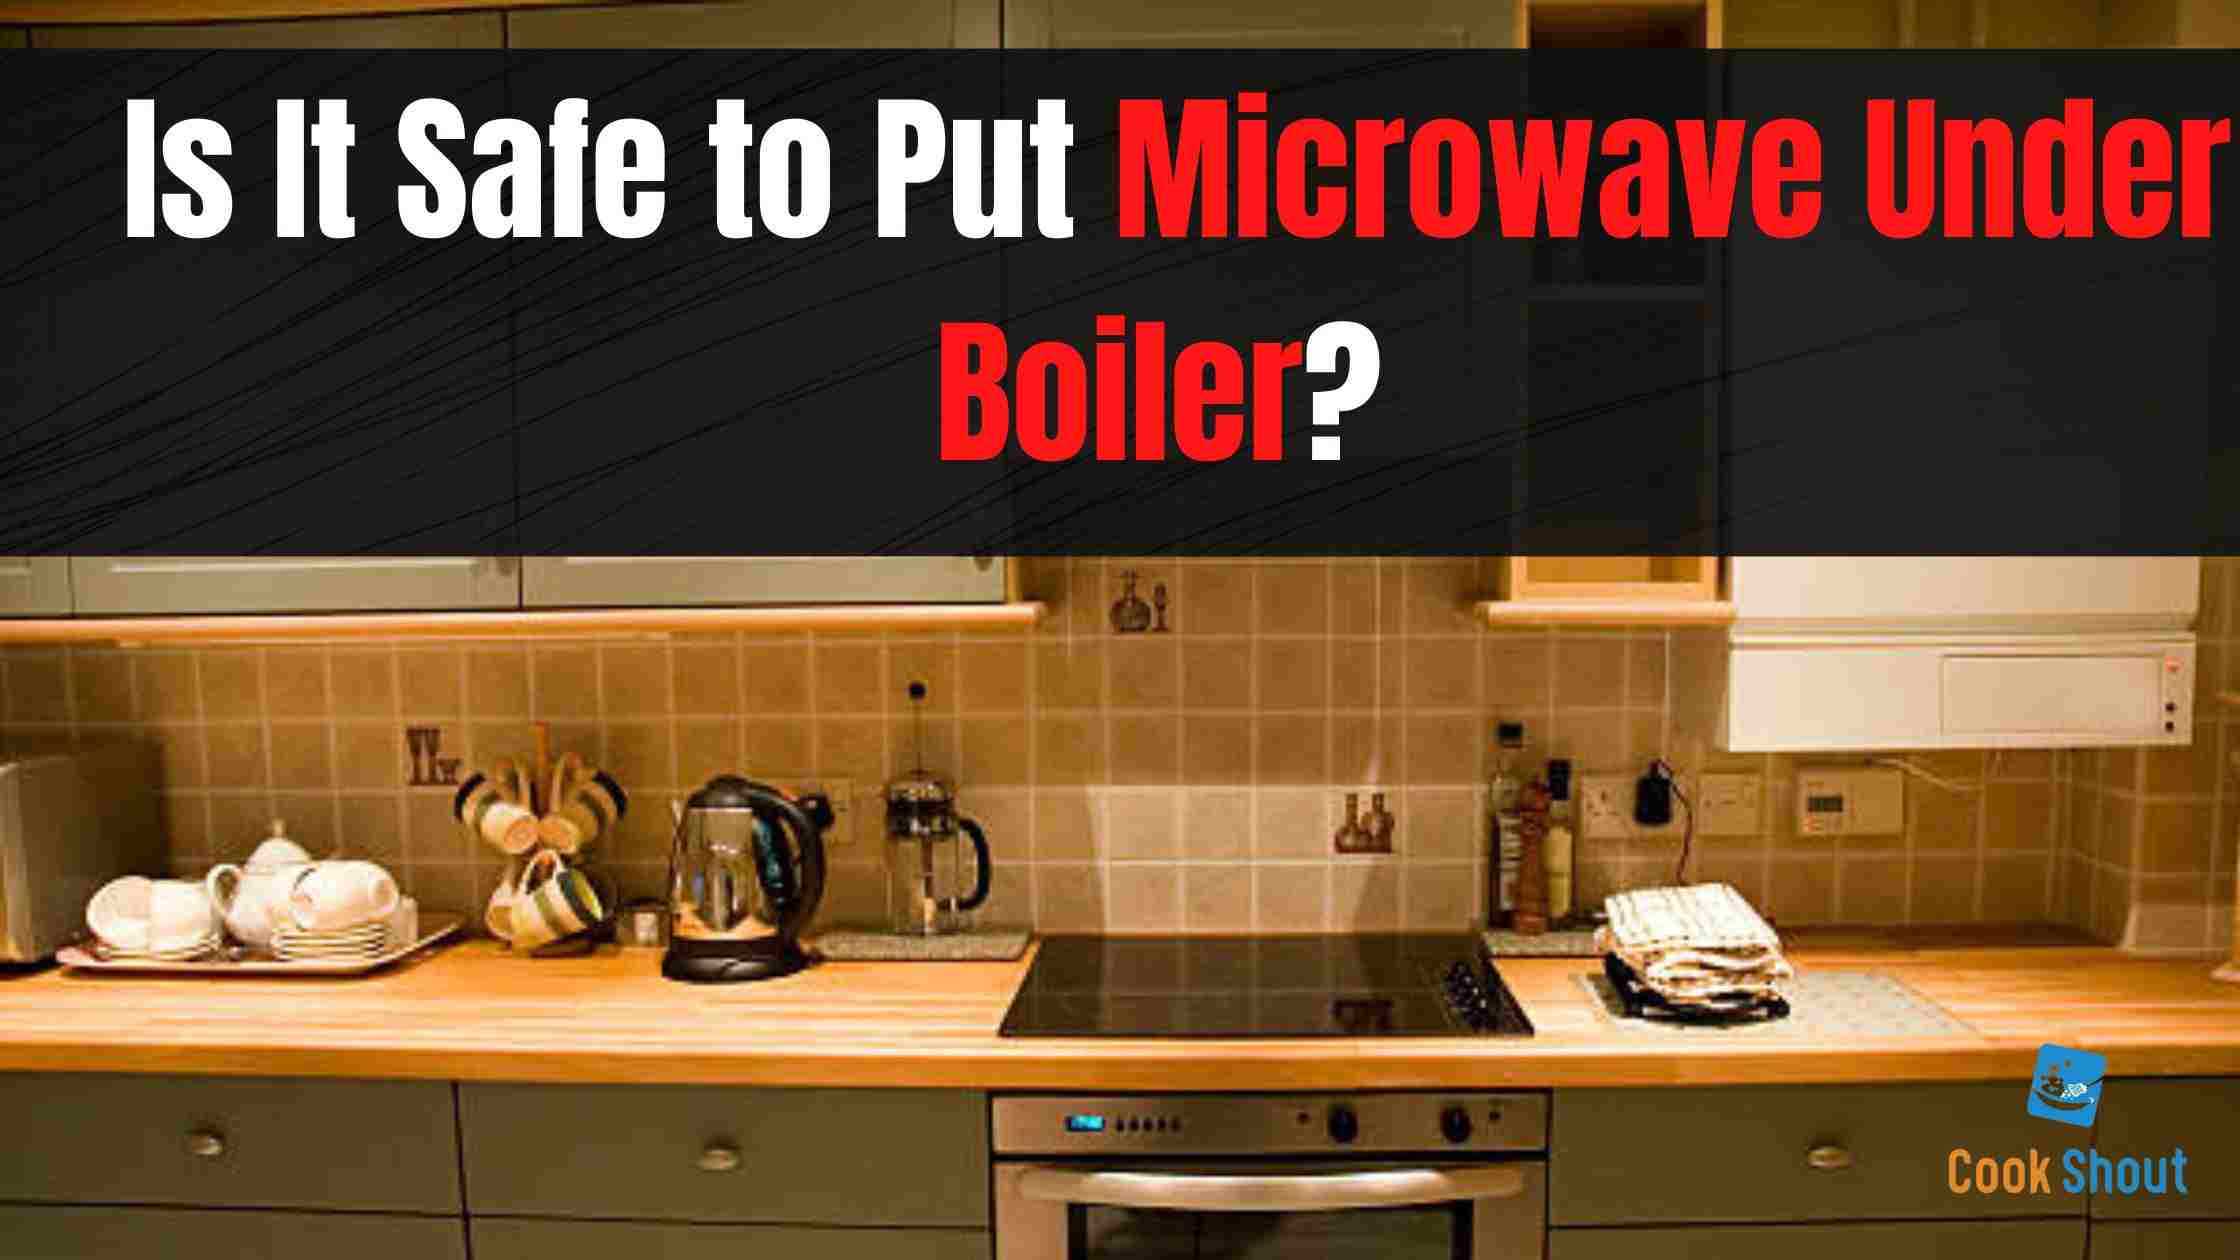 is it safe to put microwave under boiler